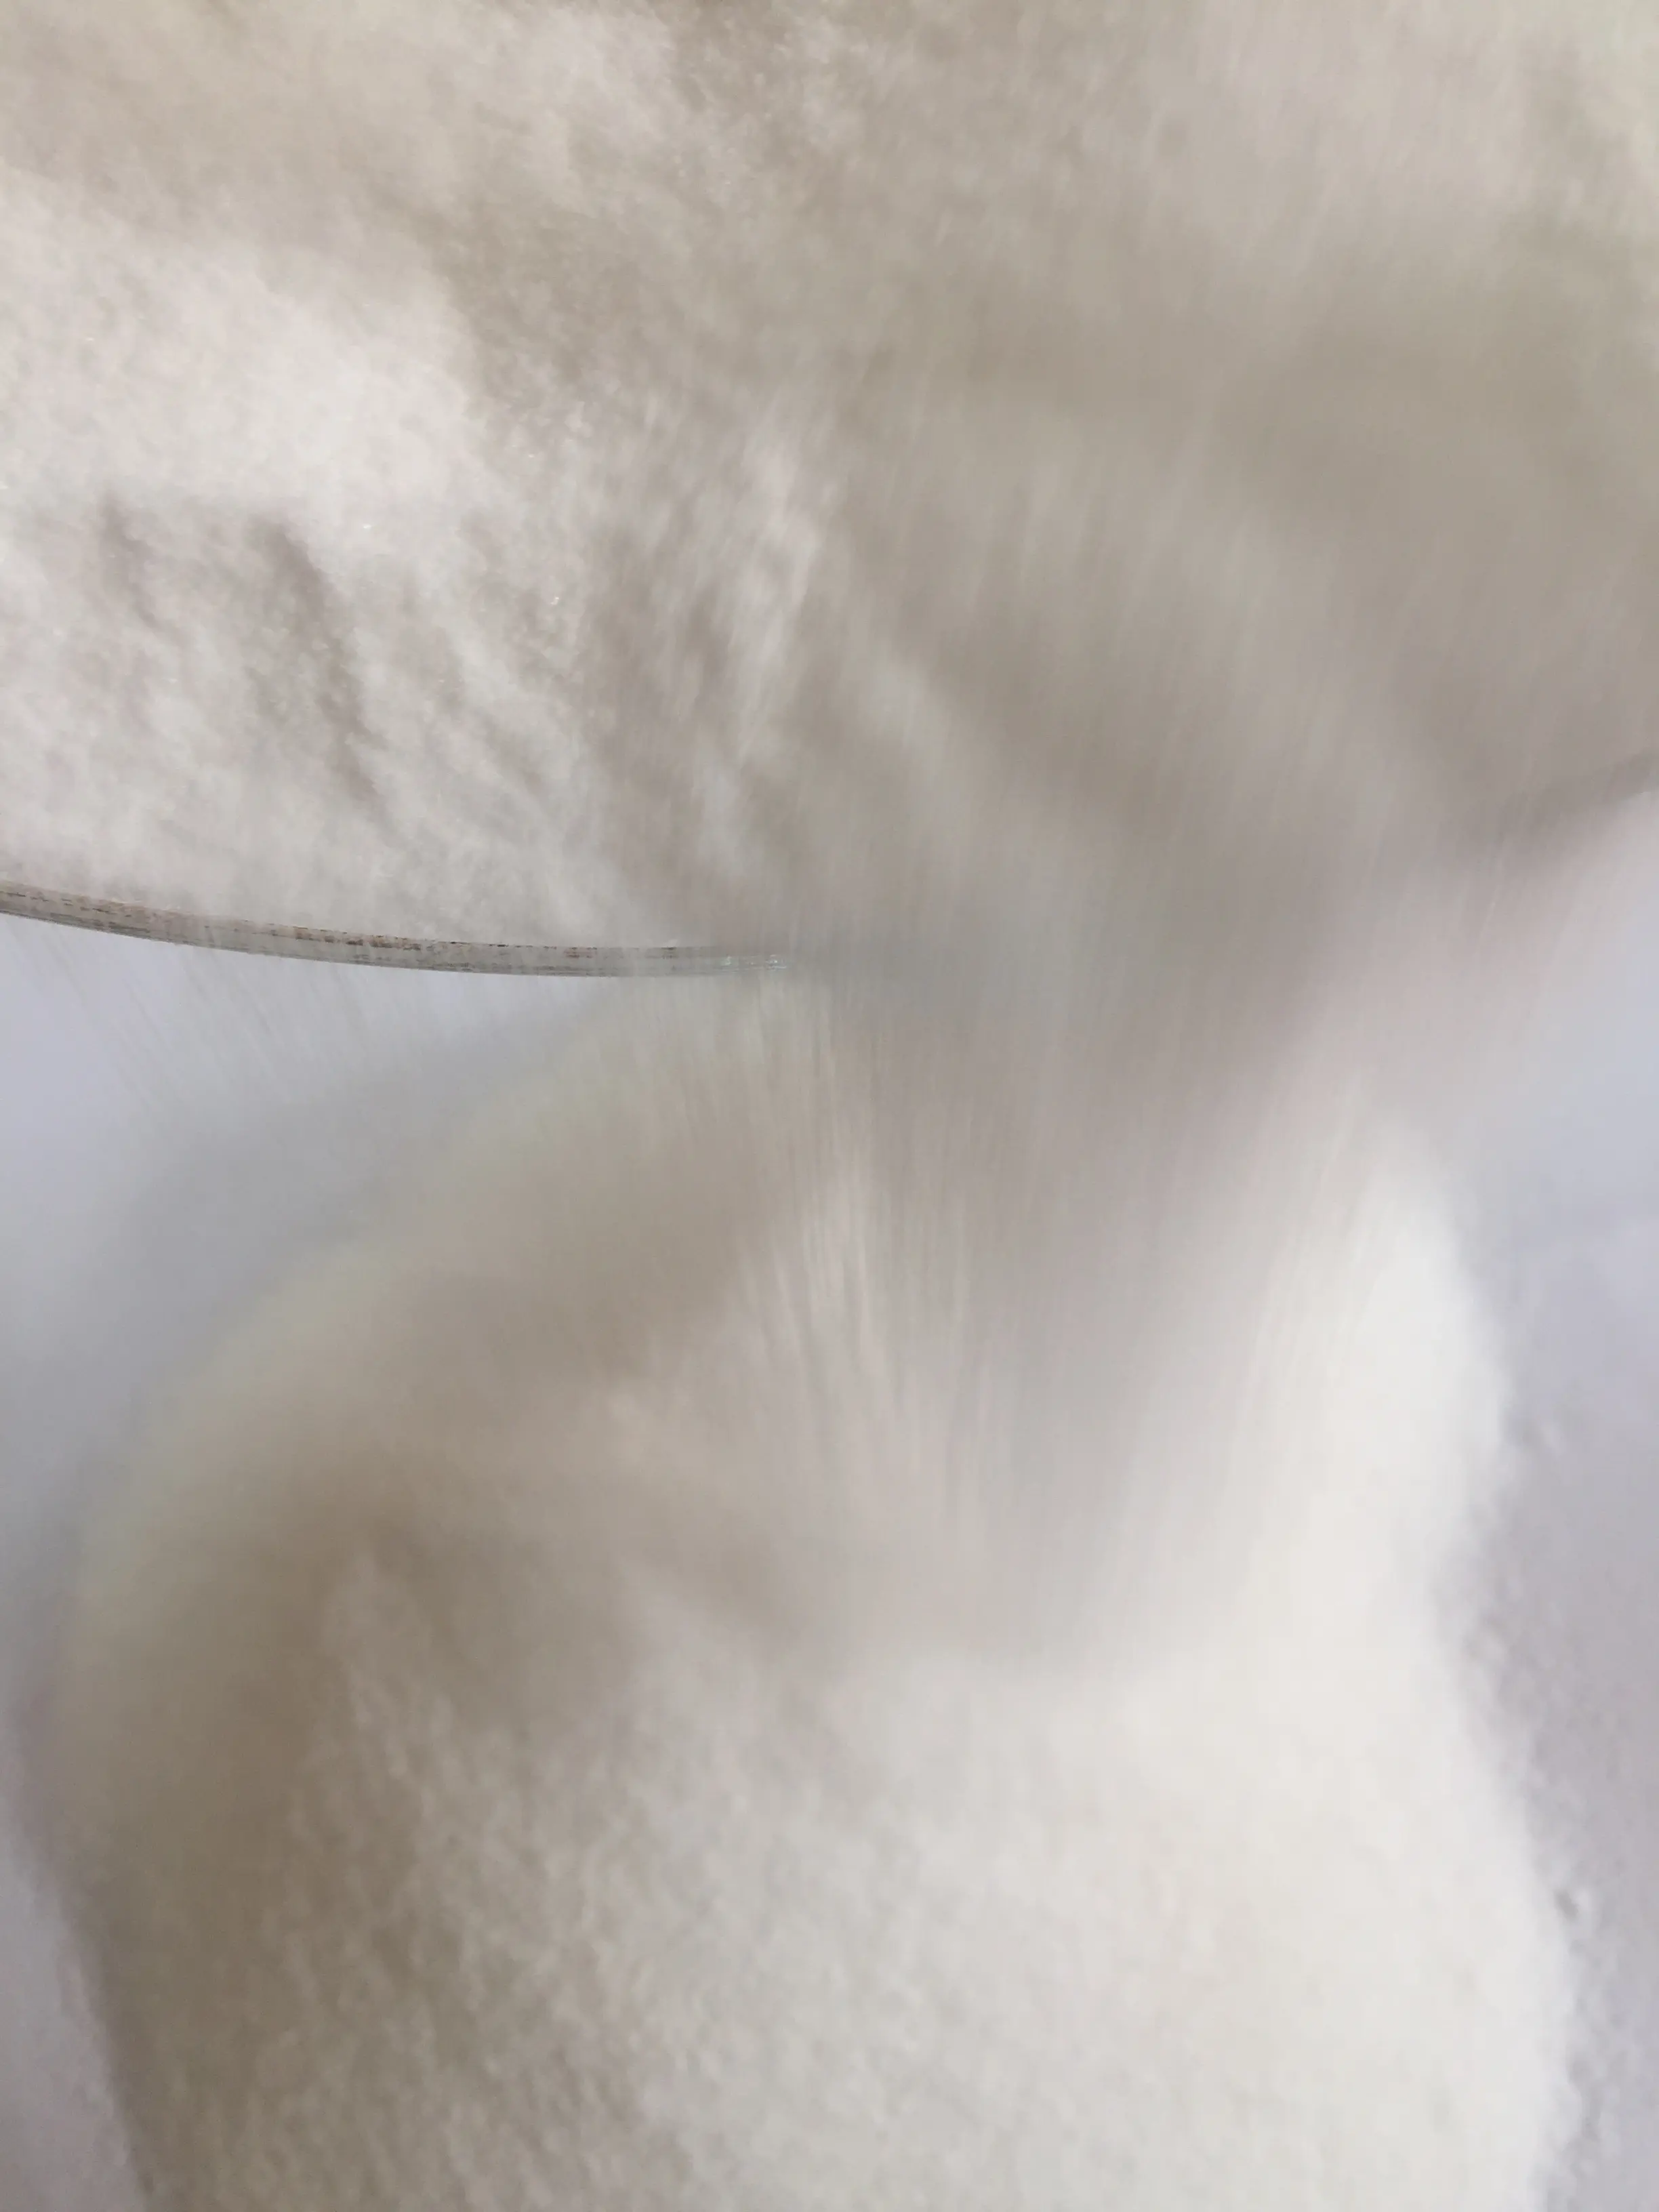 Largest Supplier High Quality Low Price Food Grade Potassium Chloride KCl